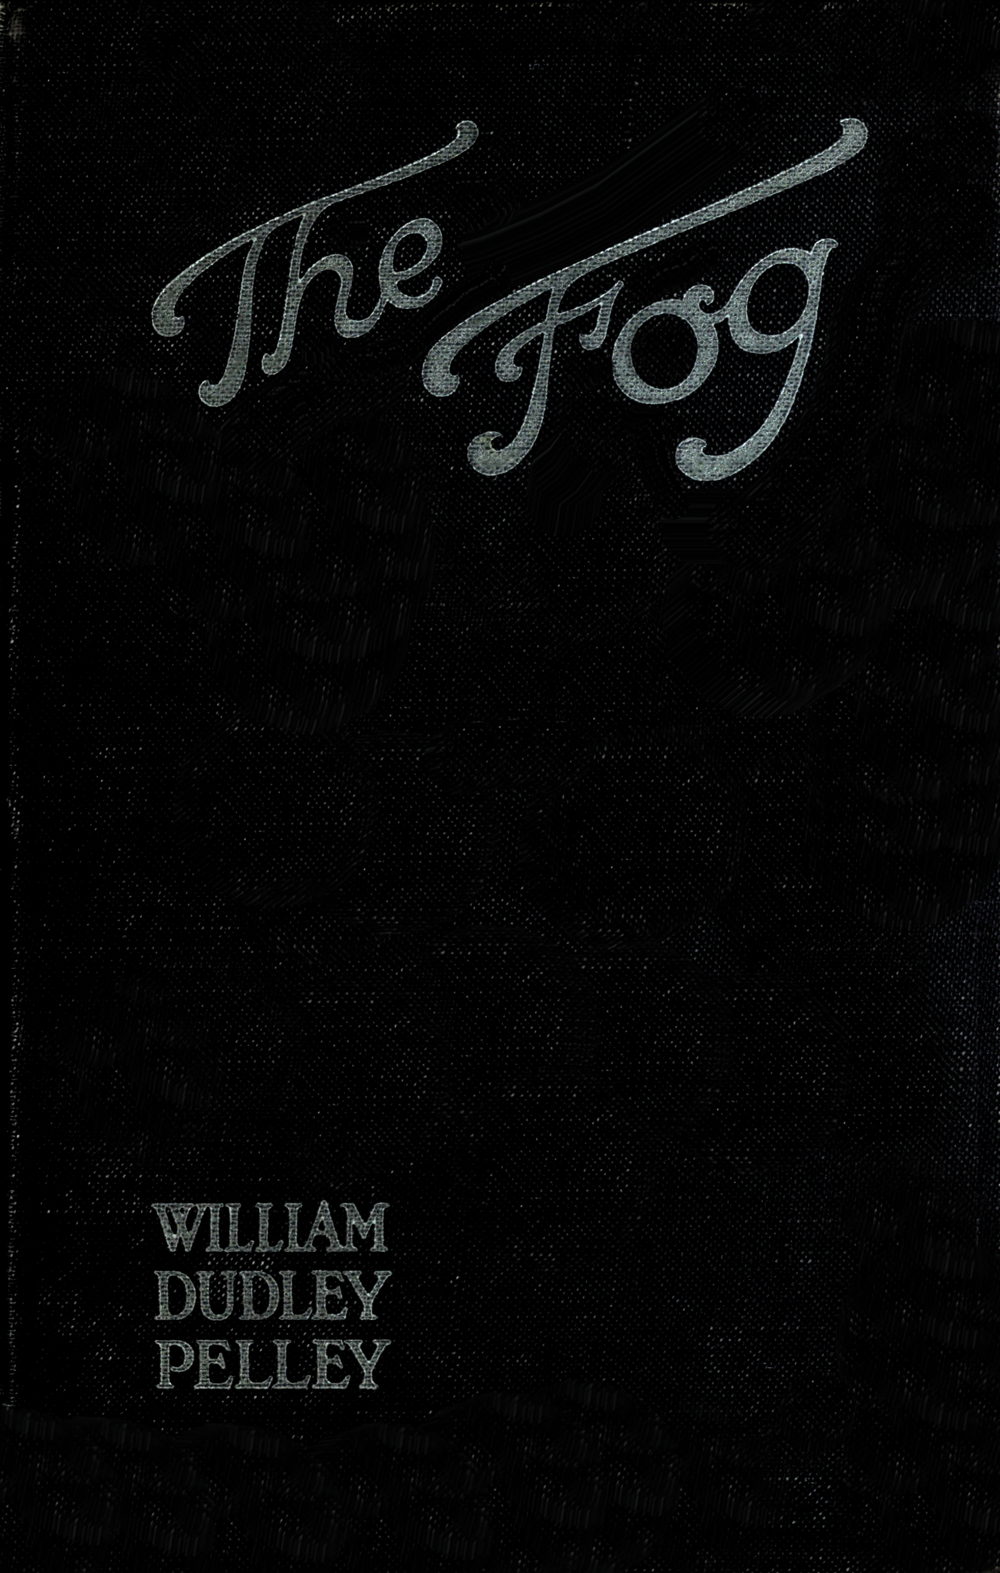 The Fog, by William Dudley Pelley—A Project Gutenberg eBook pic